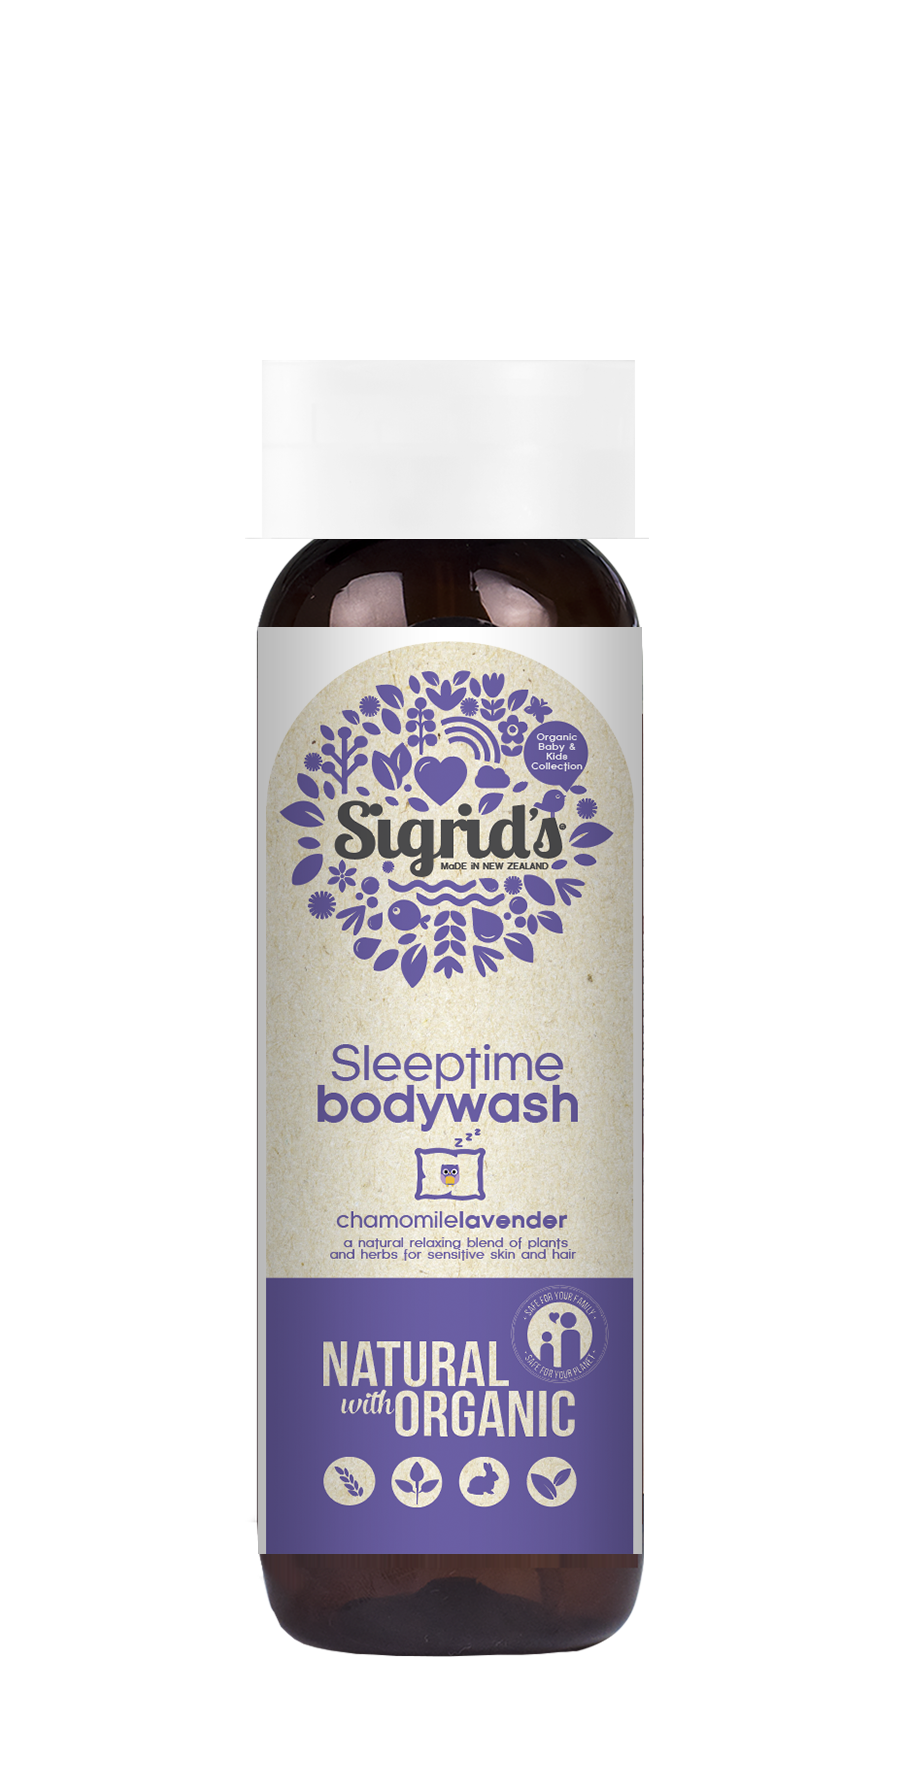 Natural Sleepy bodywash, with organic extracts